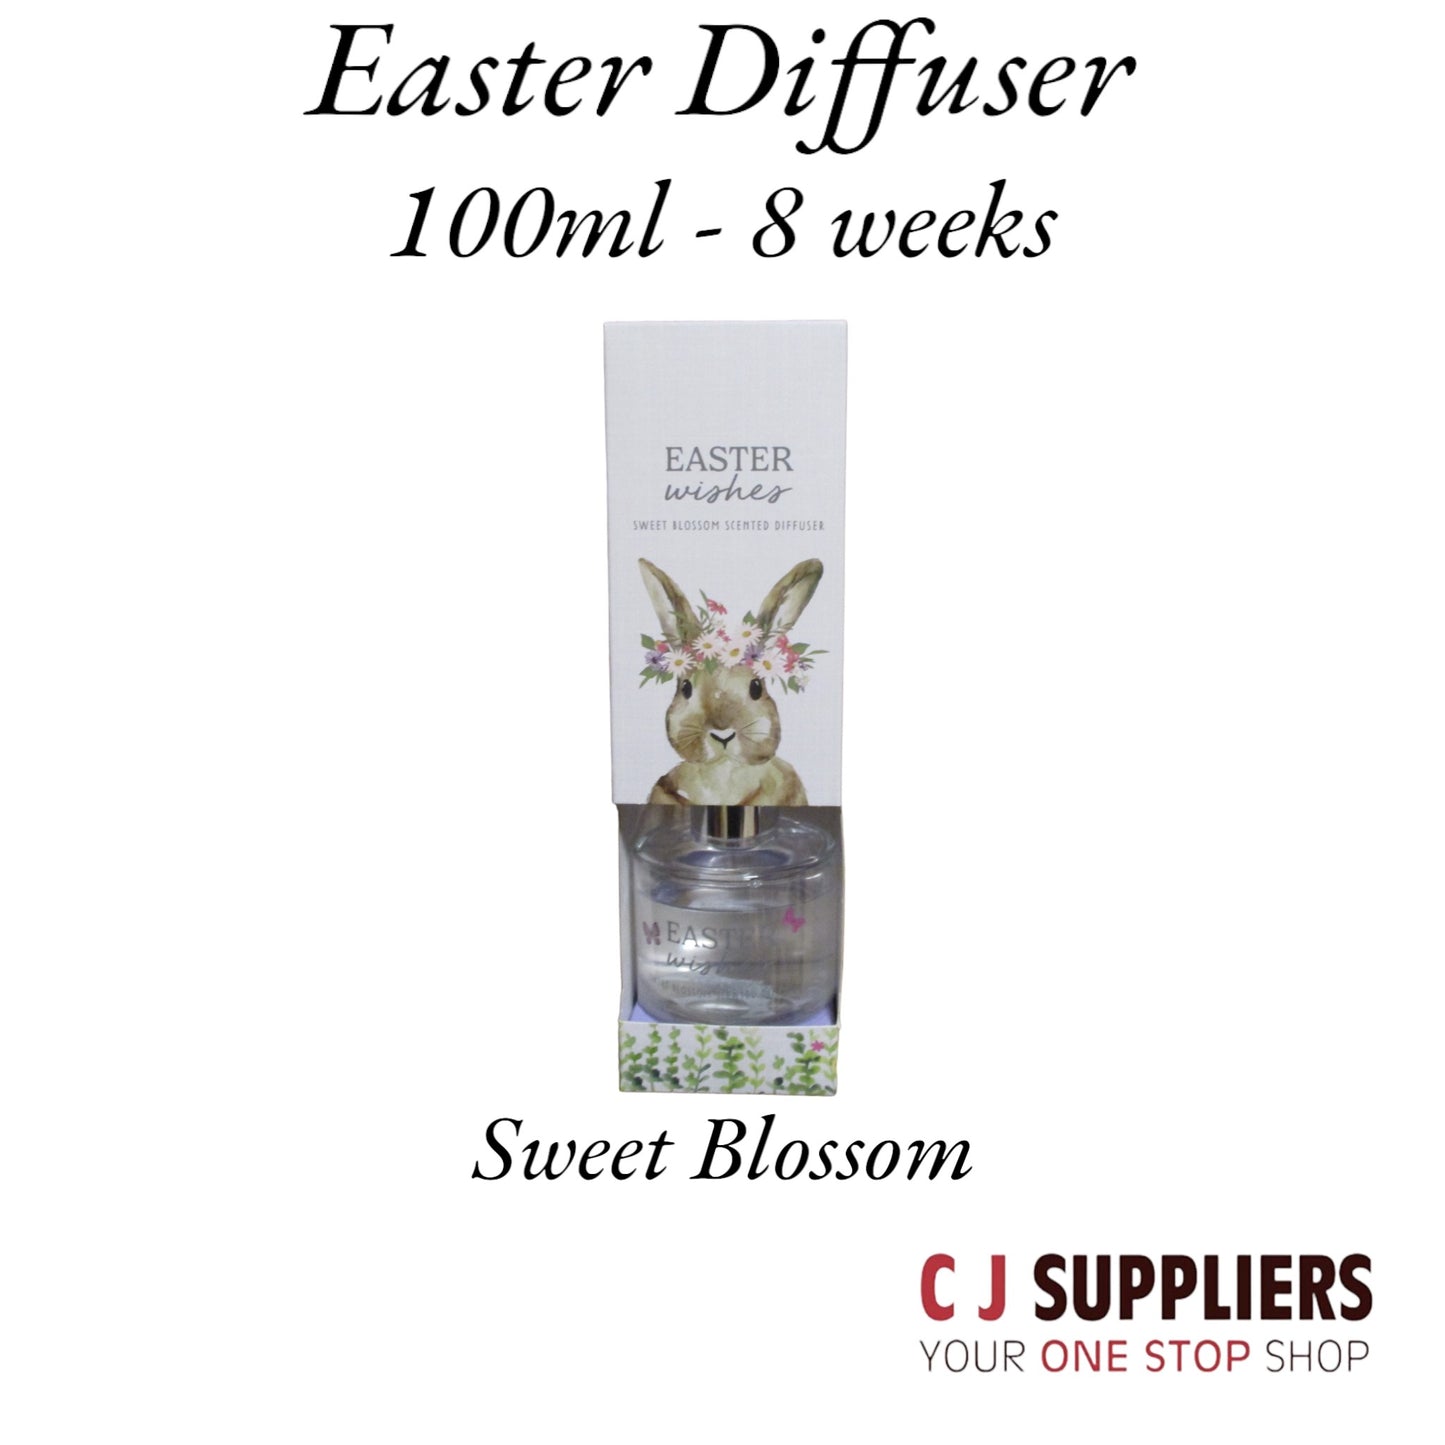 Easter Diffuser or Candle in Sweet Blossom / White Chocolate / Frosted Vanilla